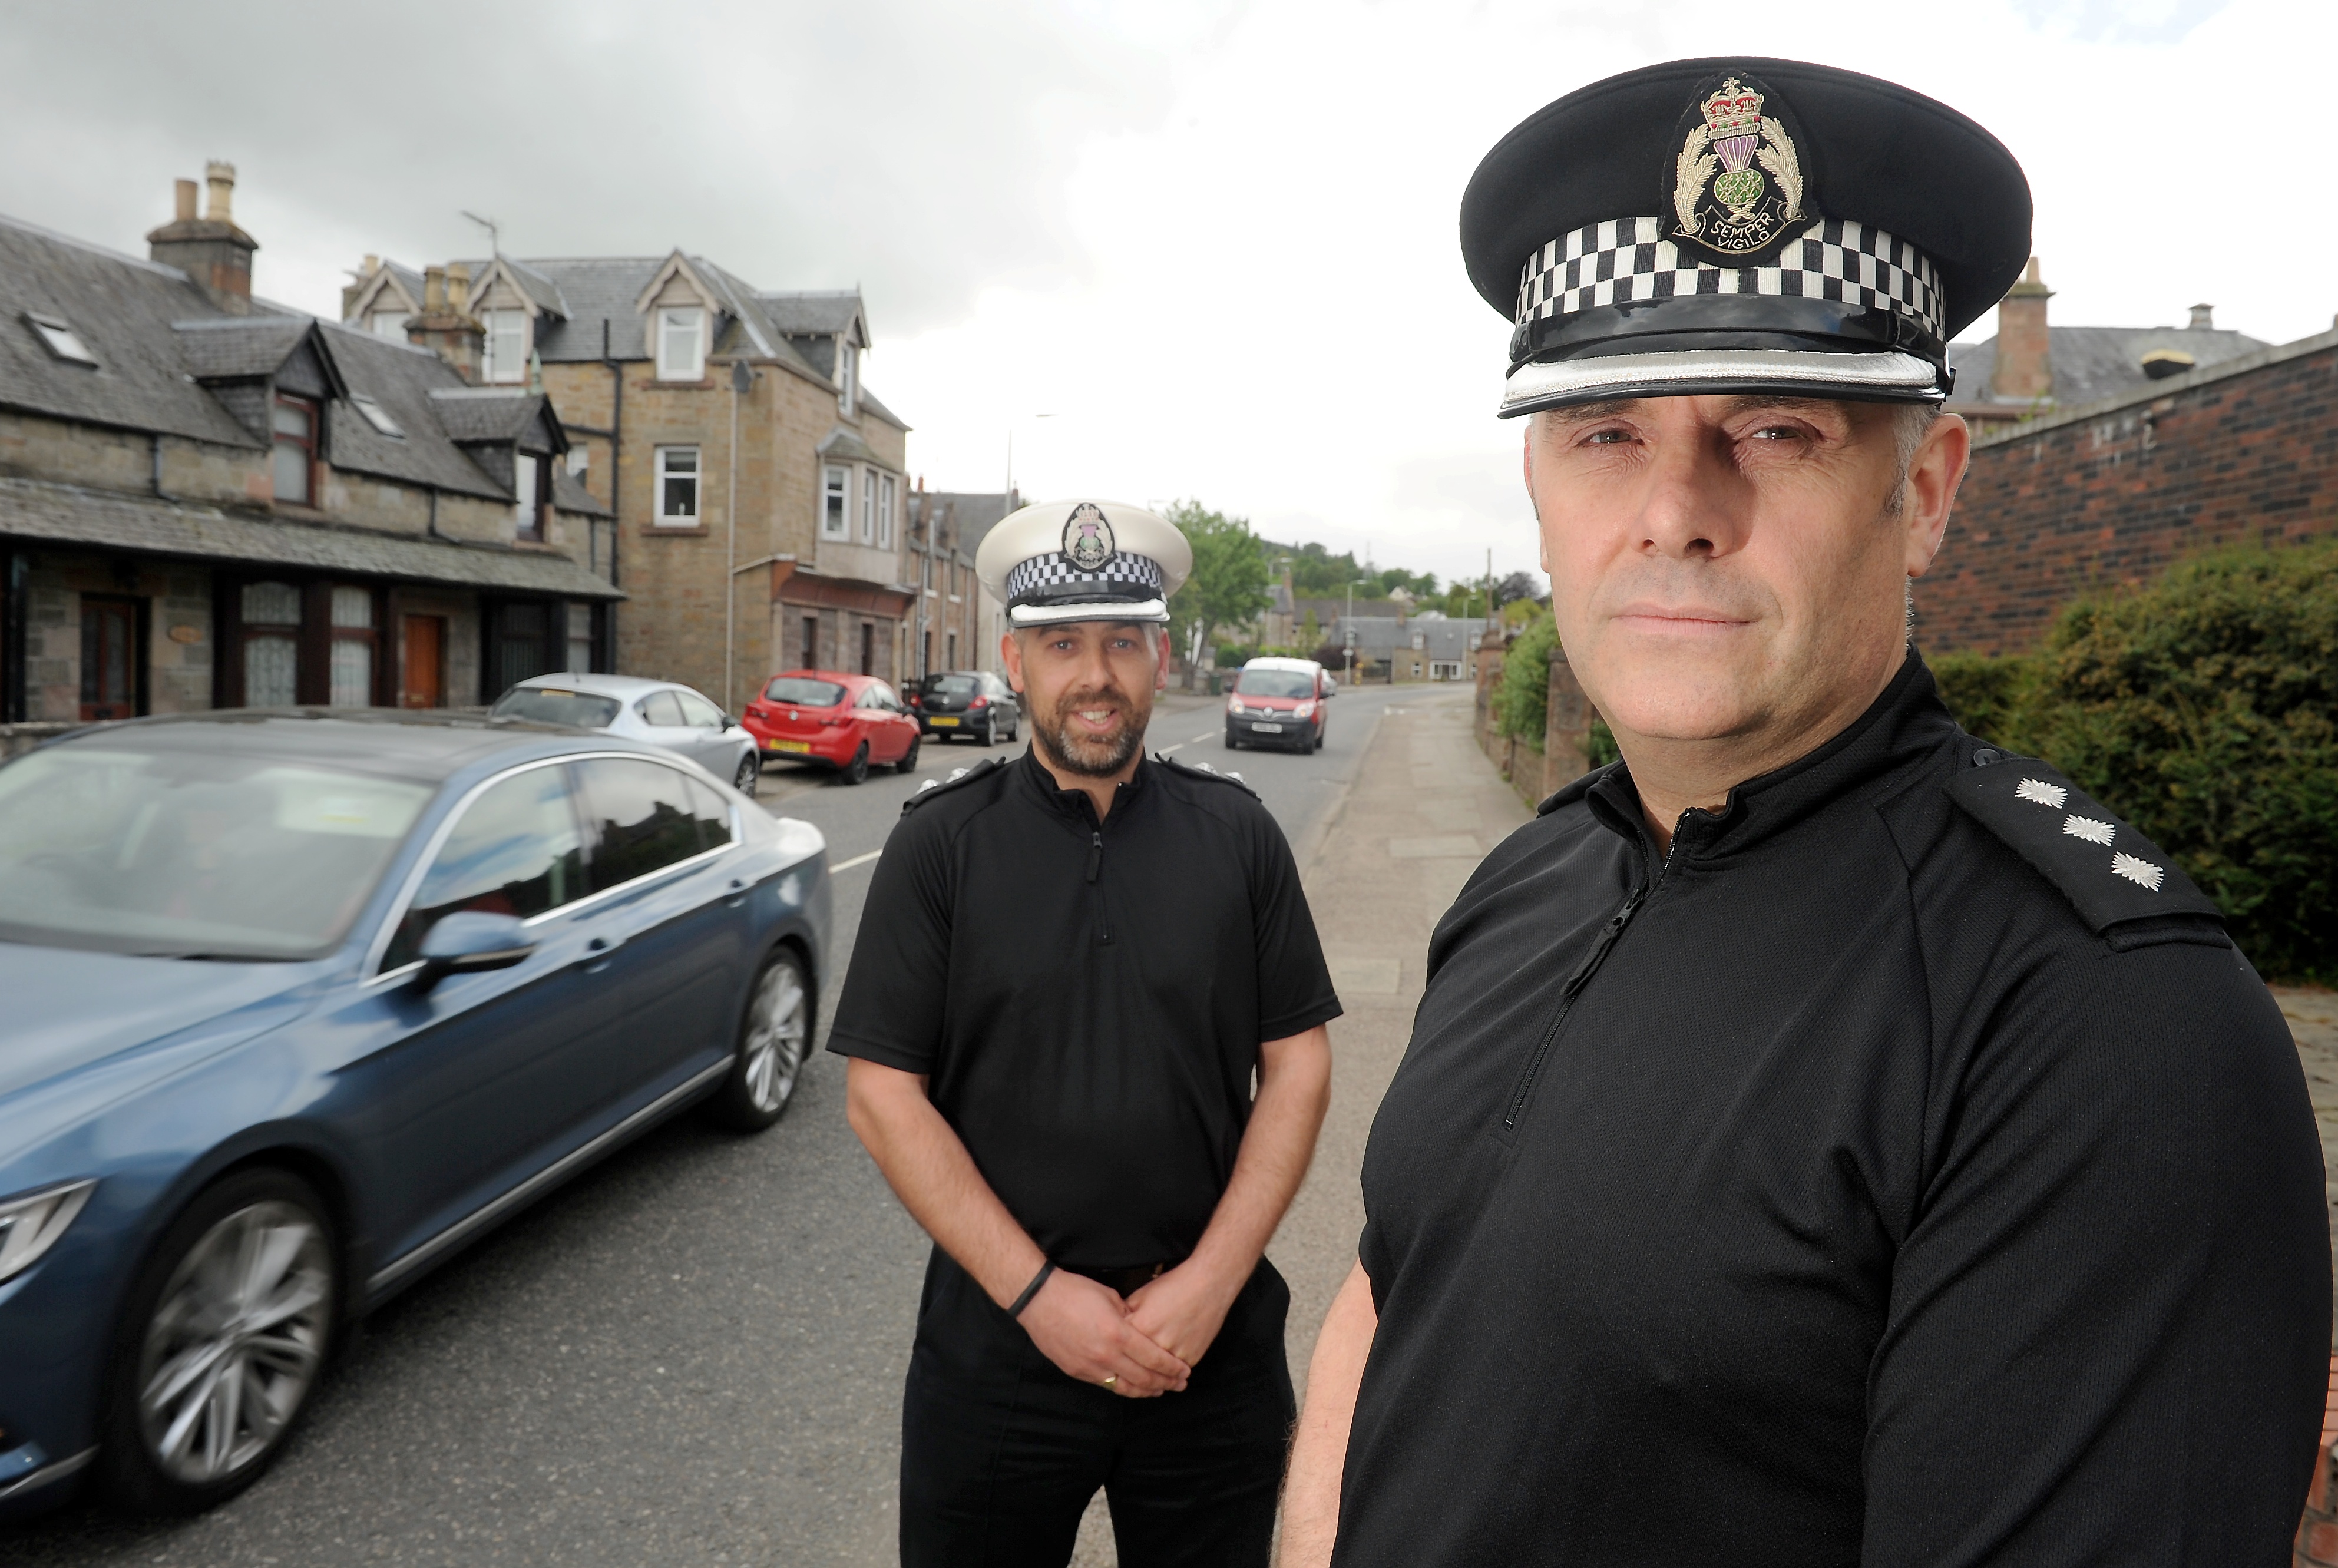 Road Policing Inspector Neil Lumsden (left) and area Commander Chief Inspector Iain MacLelland.